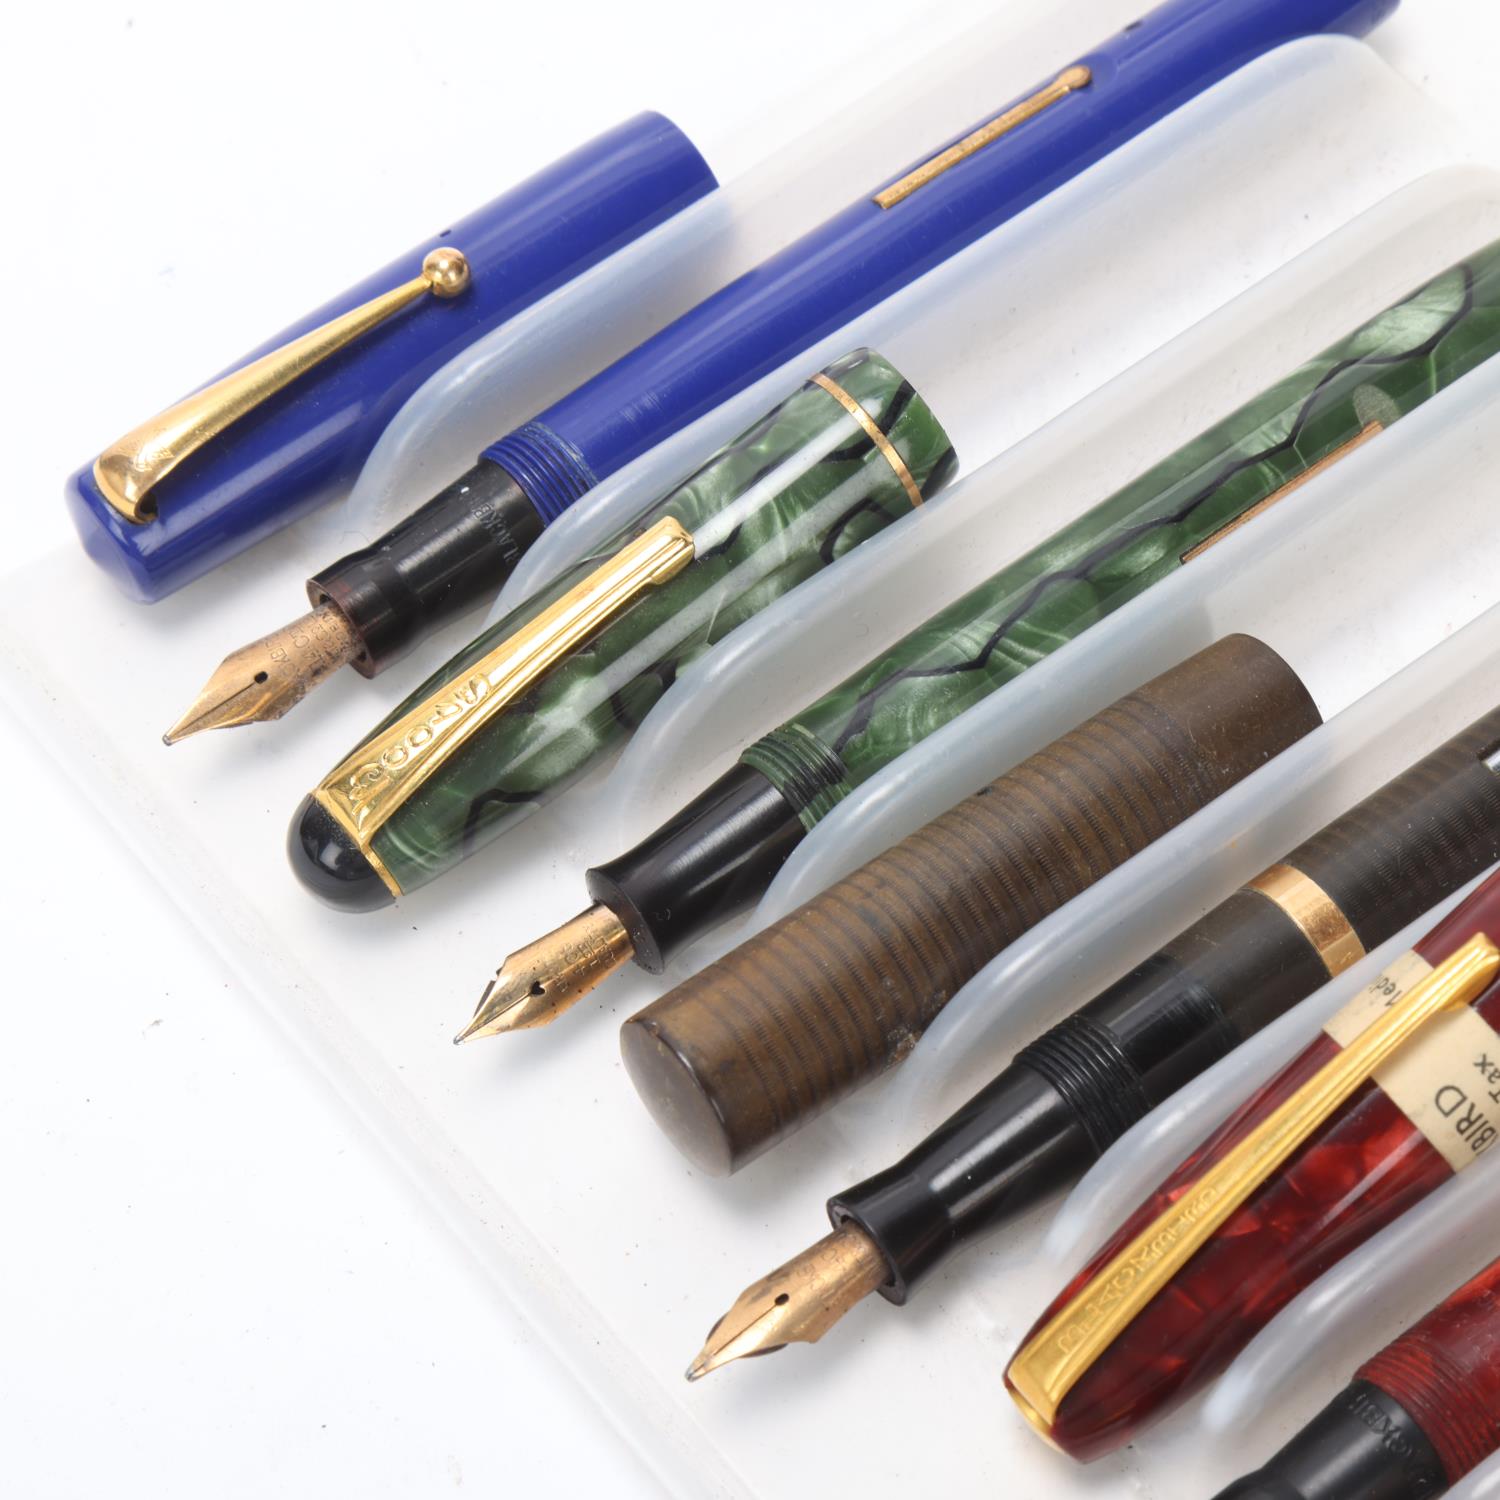 6 vintage fountain pens, 4x Mabie, Todd & Co. - Blackbird, 1 Boots and a Unica, all with 14ct gold - Image 3 of 4